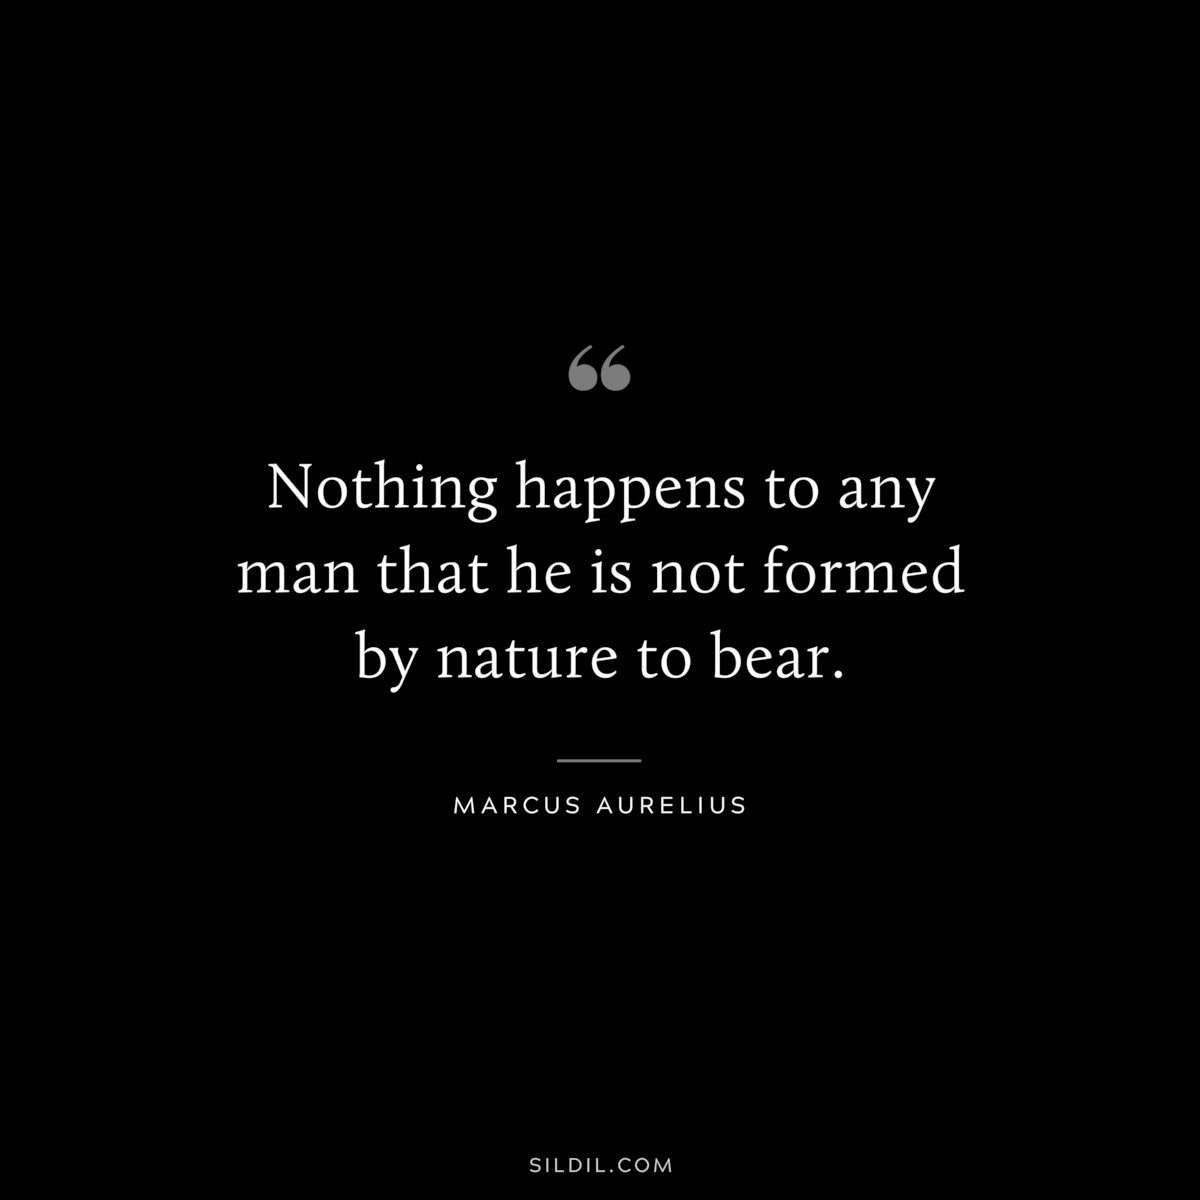 Nothing happens to any man that he is not formed by nature to bear. ― Marcus Aurelius